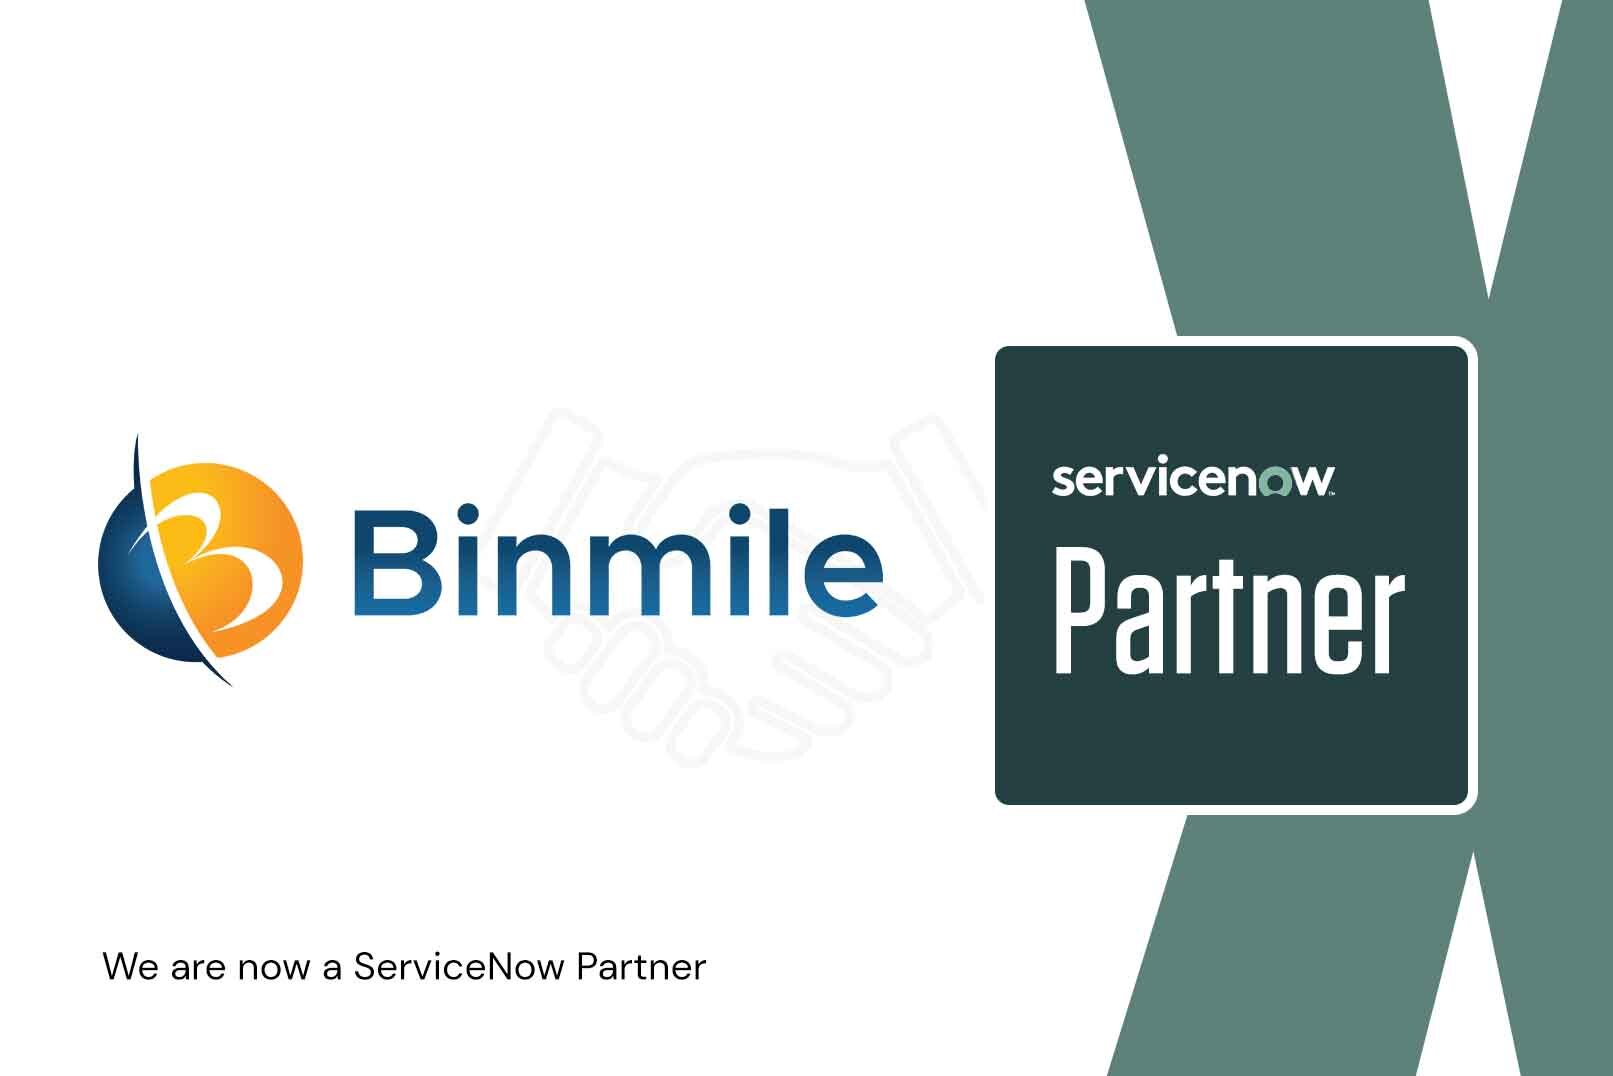 Binmile Forges Long-term Partnership with ServiceNow